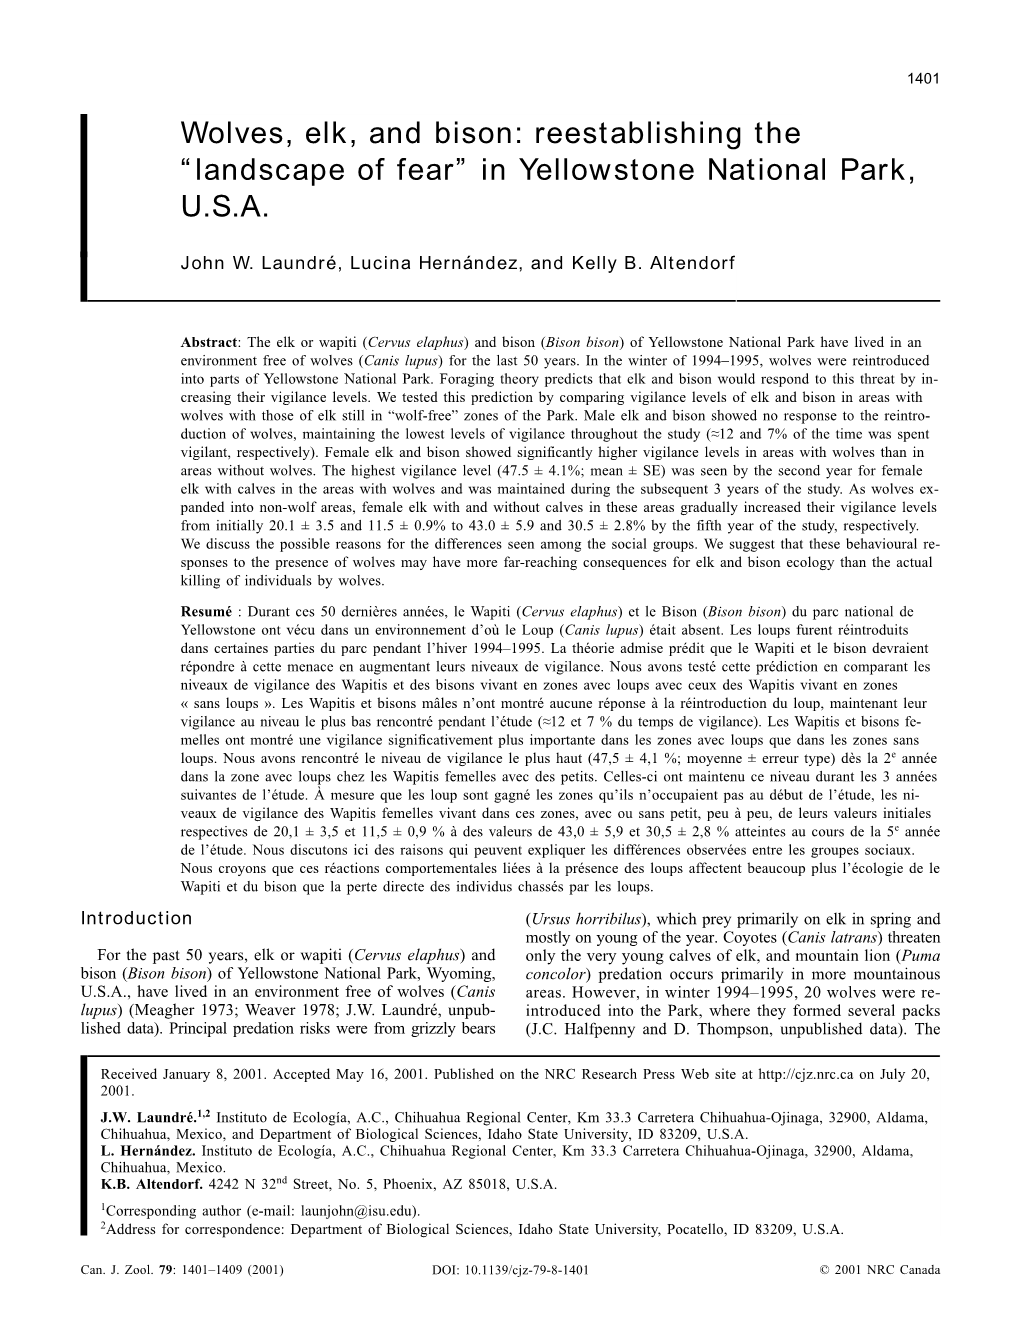 Wolves, Elk, and Bison: Reestablishing the “Landscape of Fear” in Yellowstone National Park, U.S.A